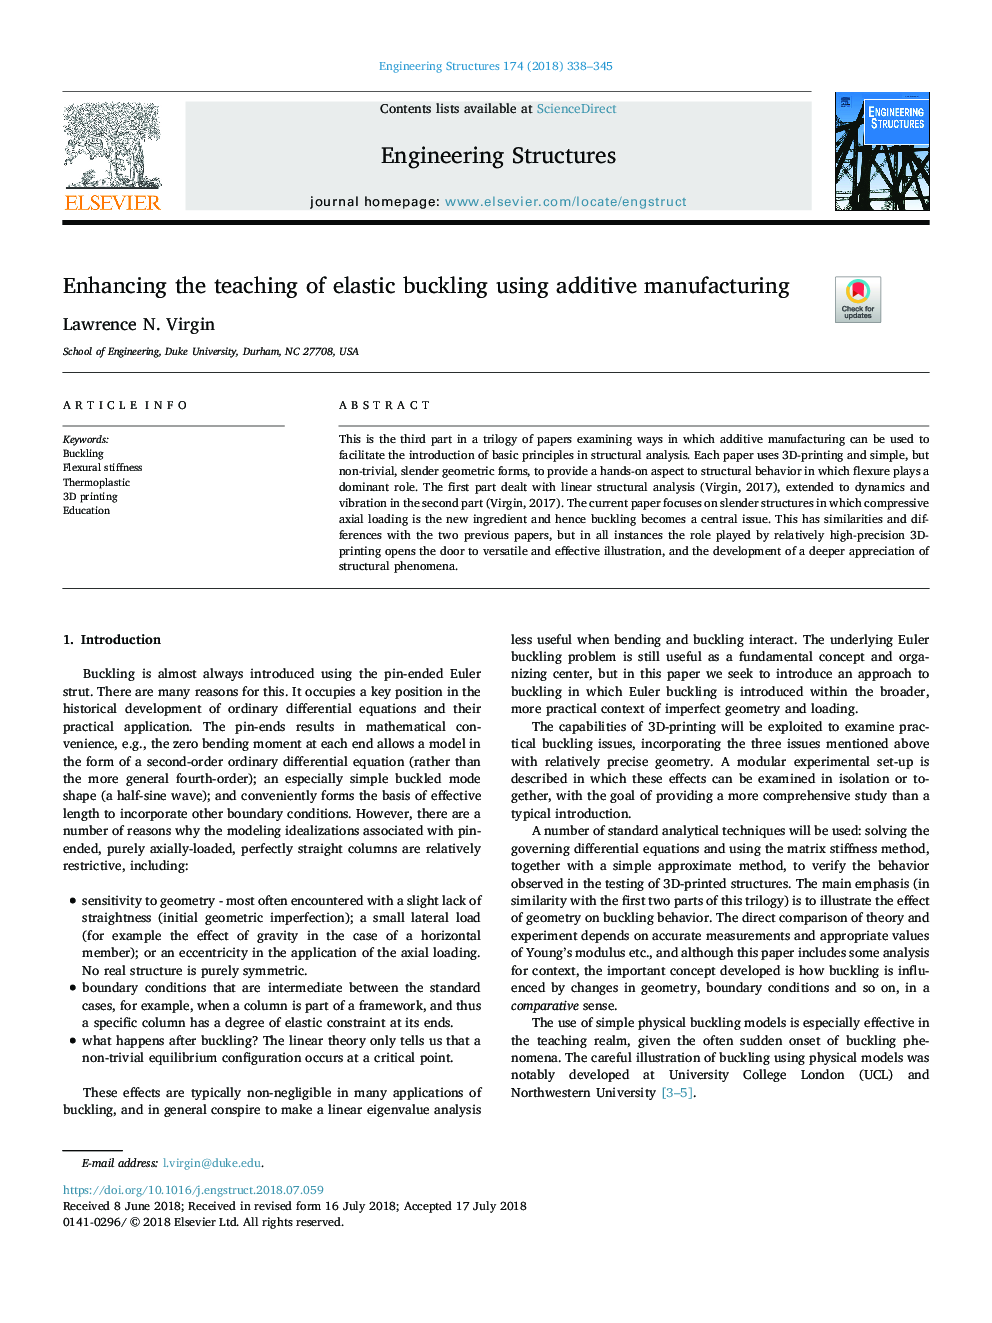 Enhancing the teaching of elastic buckling using additive manufacturing